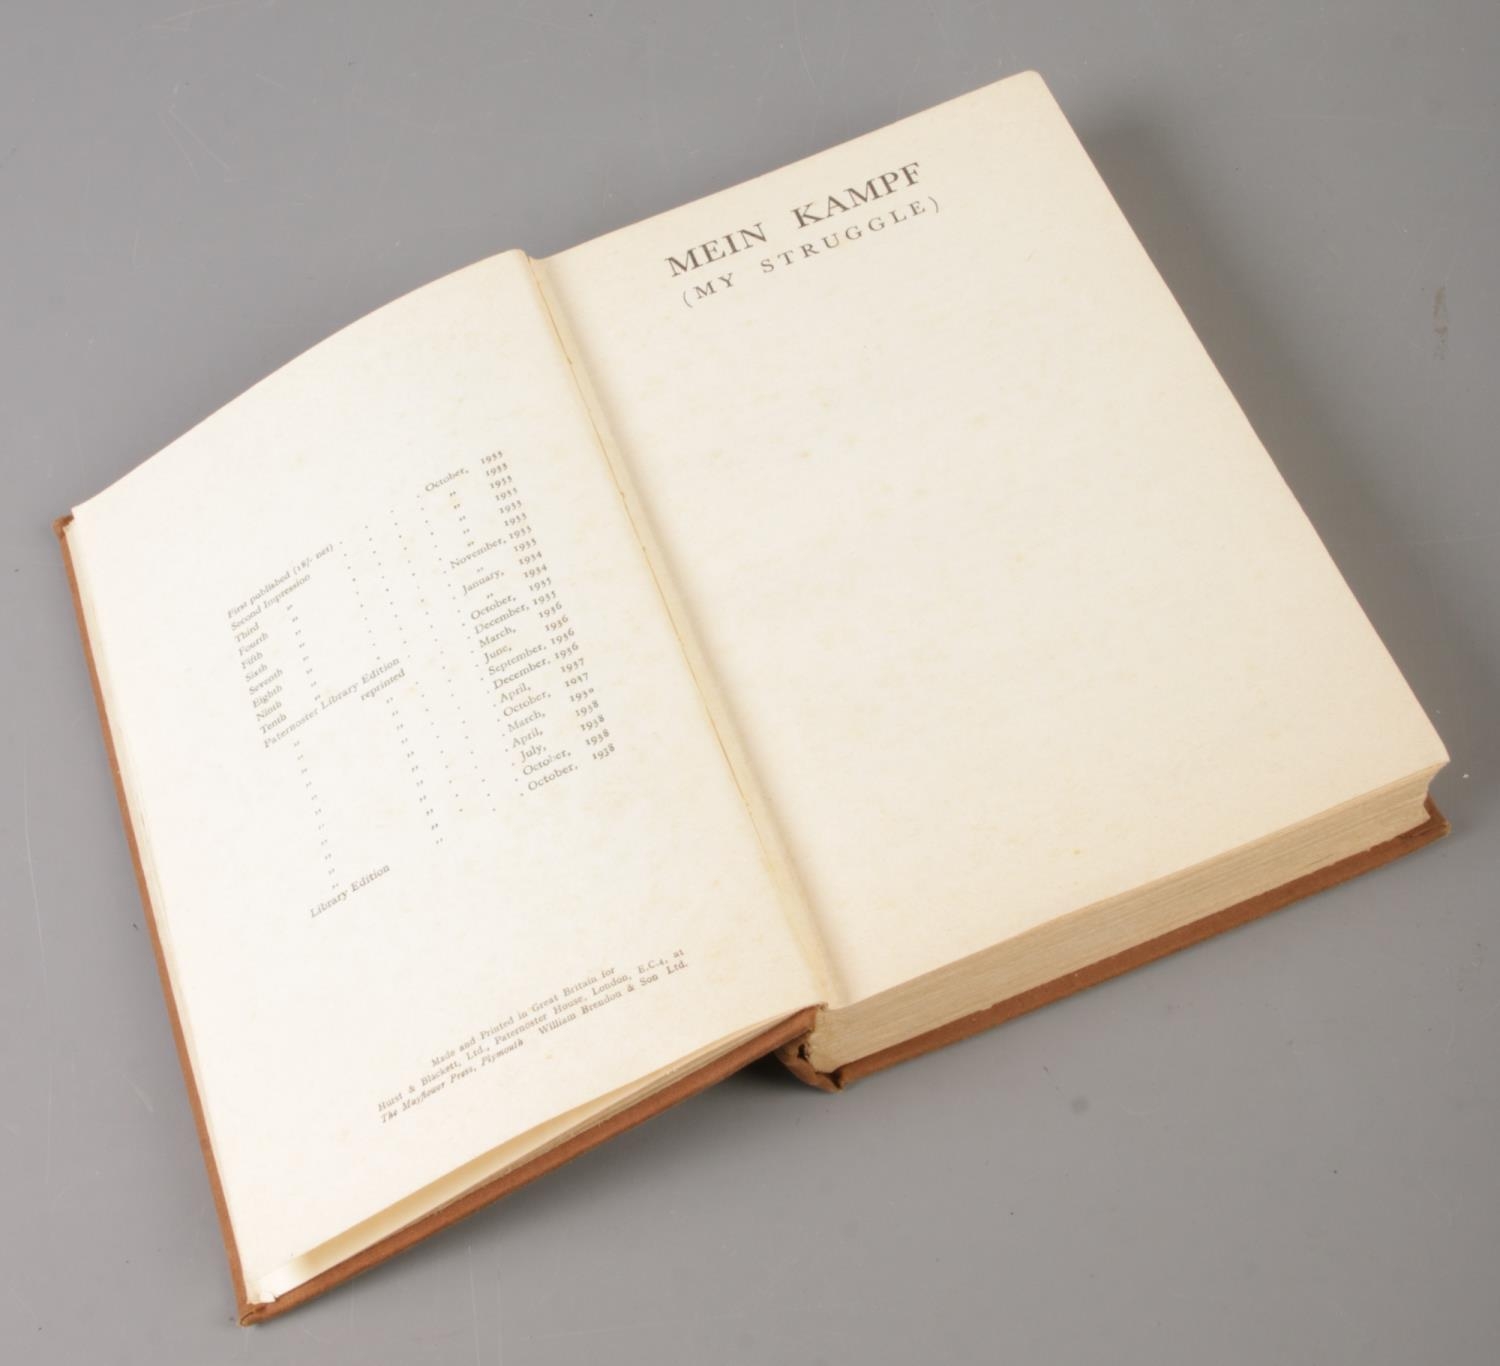 A Library Edition 1938 Hardback copy of Adolf Hitler, My Struggle (Mein Kampf). Fair Condition. - Image 3 of 3